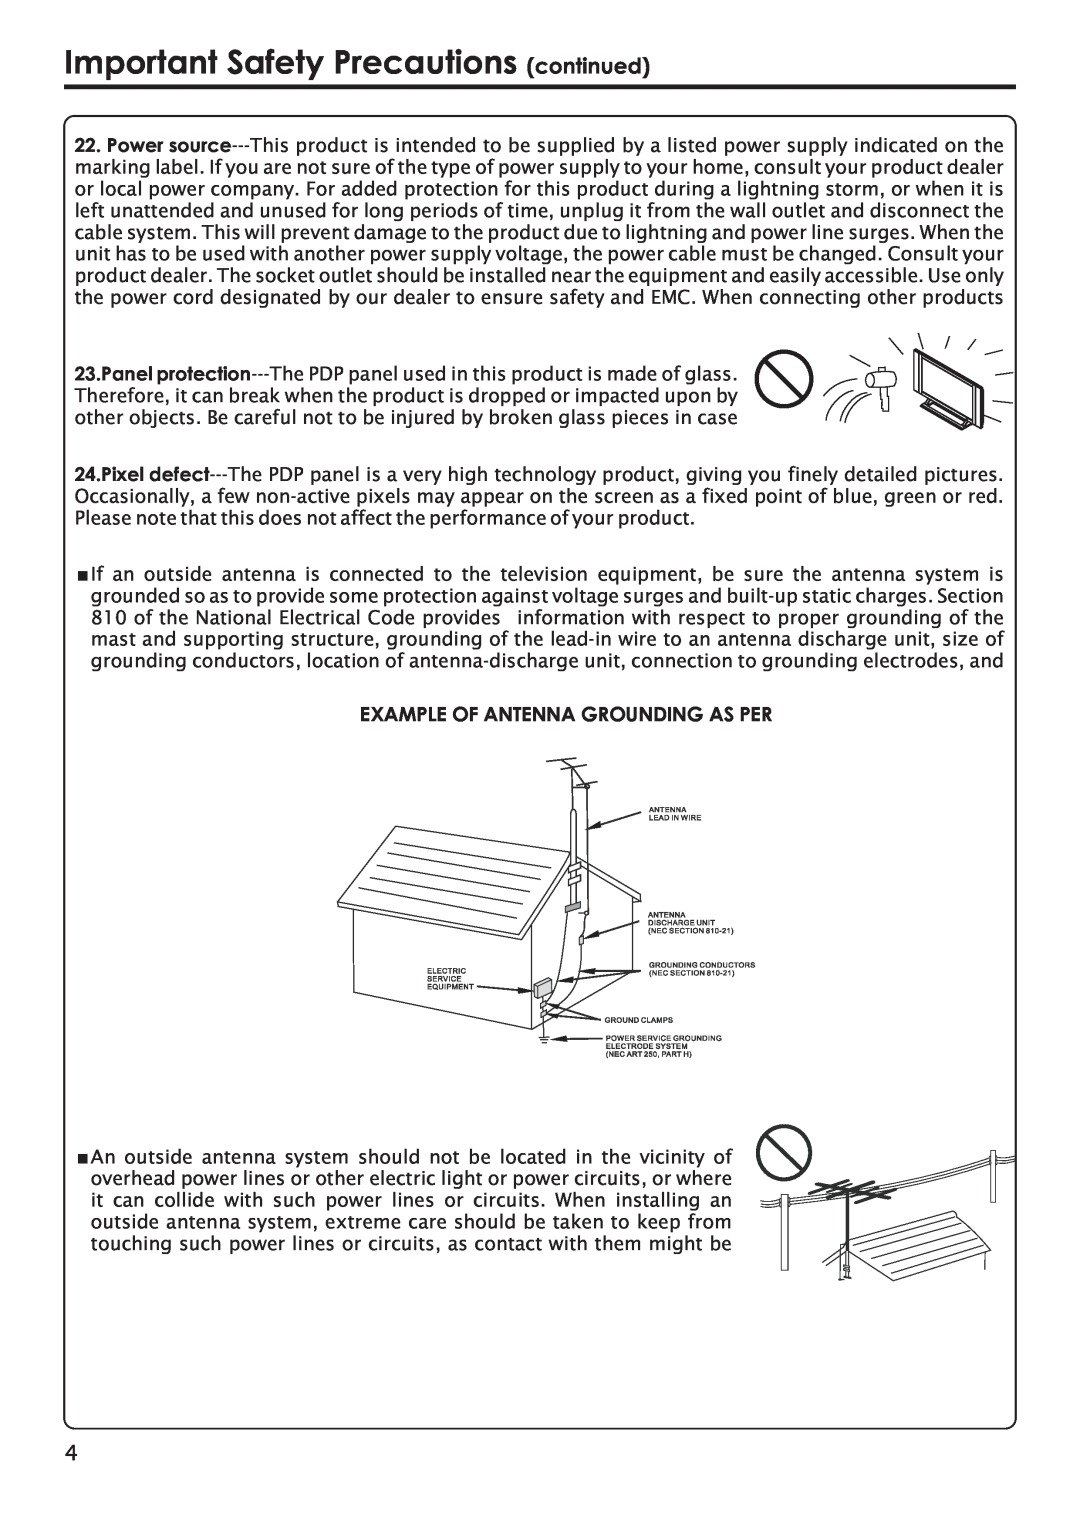 Primate Systems PDP TV manual Important Safety Precautions continued, Example Of Antenna Grounding As Per 